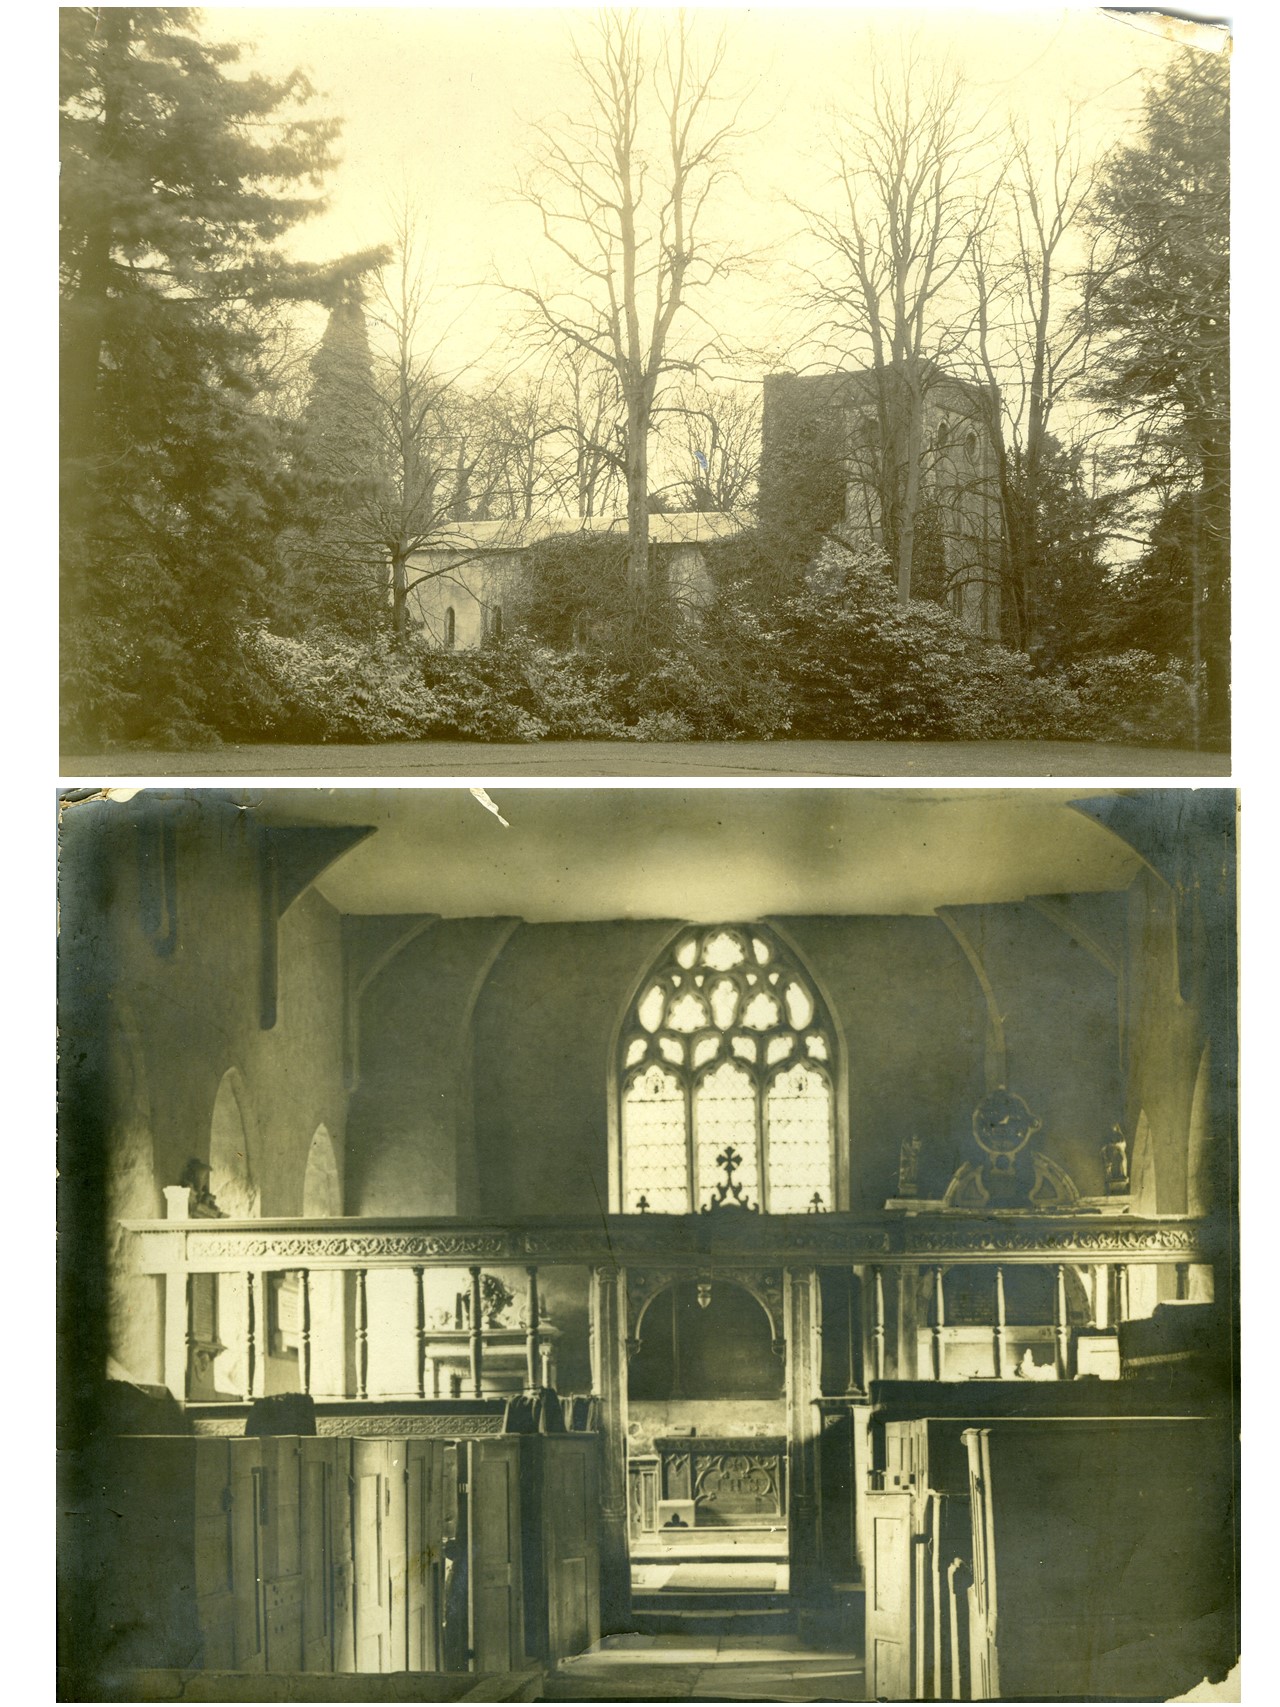 The exterior and interior before 1905